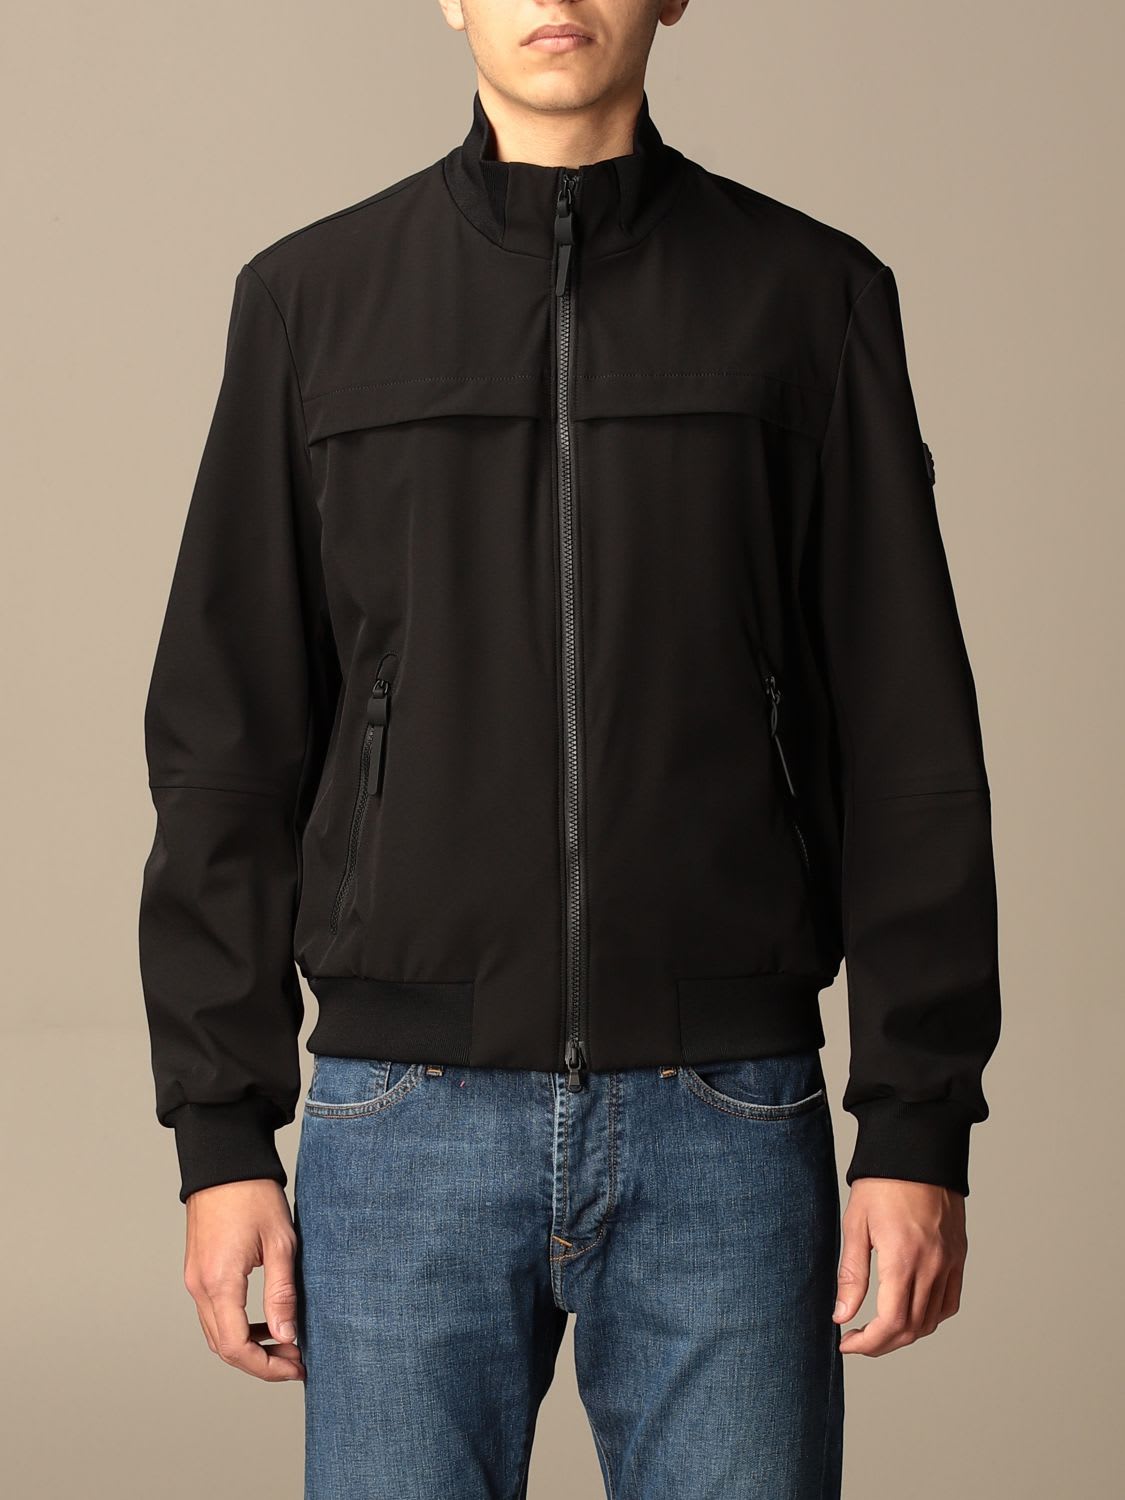 Peuterey Jacket Potosi Md Soft Shell Peuterey Bomber Jacket With Zip